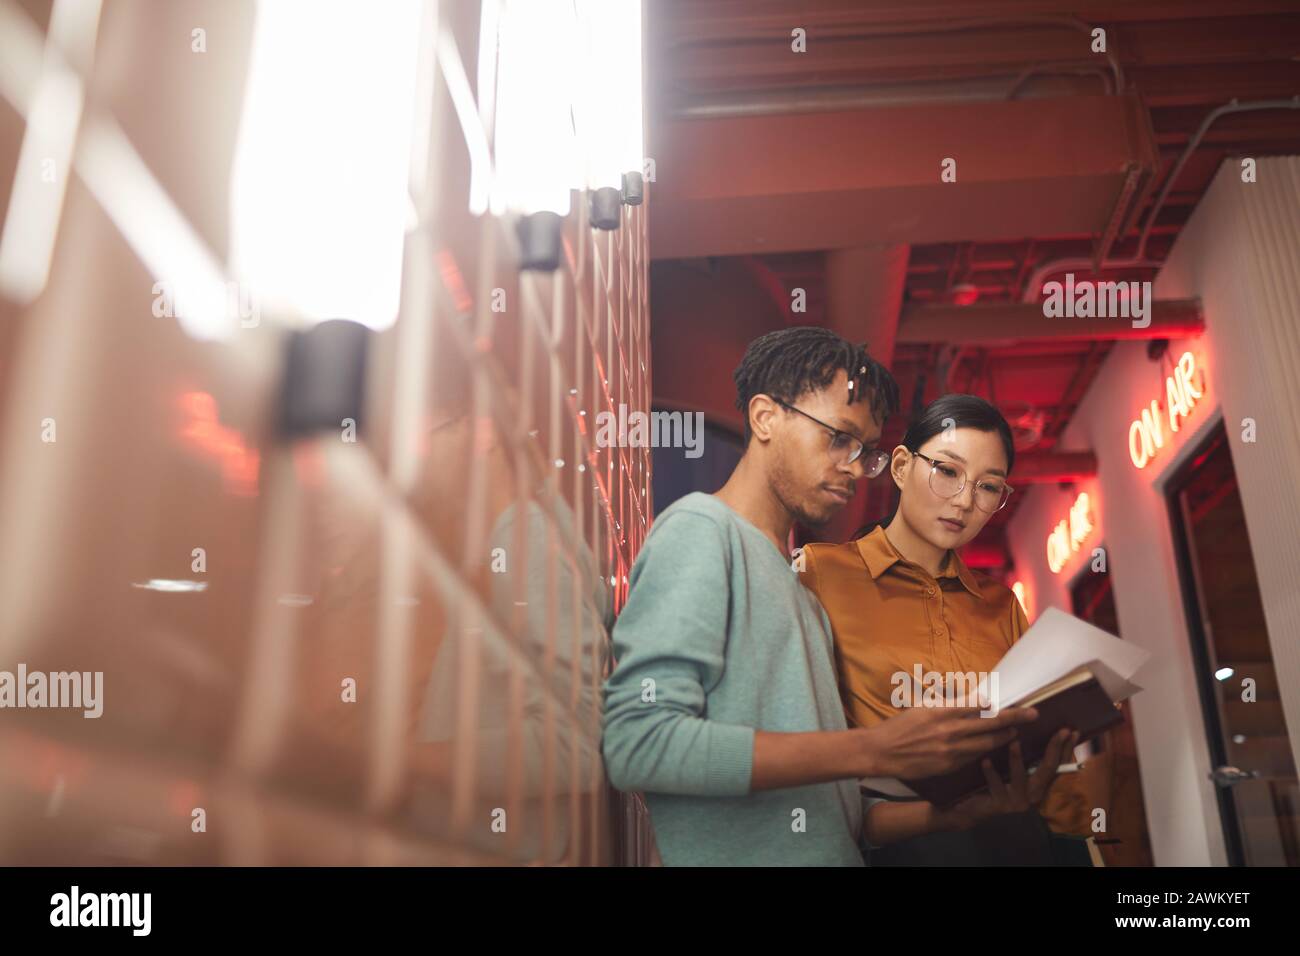 Waist up portrait of two ethnic business people discussing work documents while standing by wall outdoors in dim lighting, copy space Stock Photo